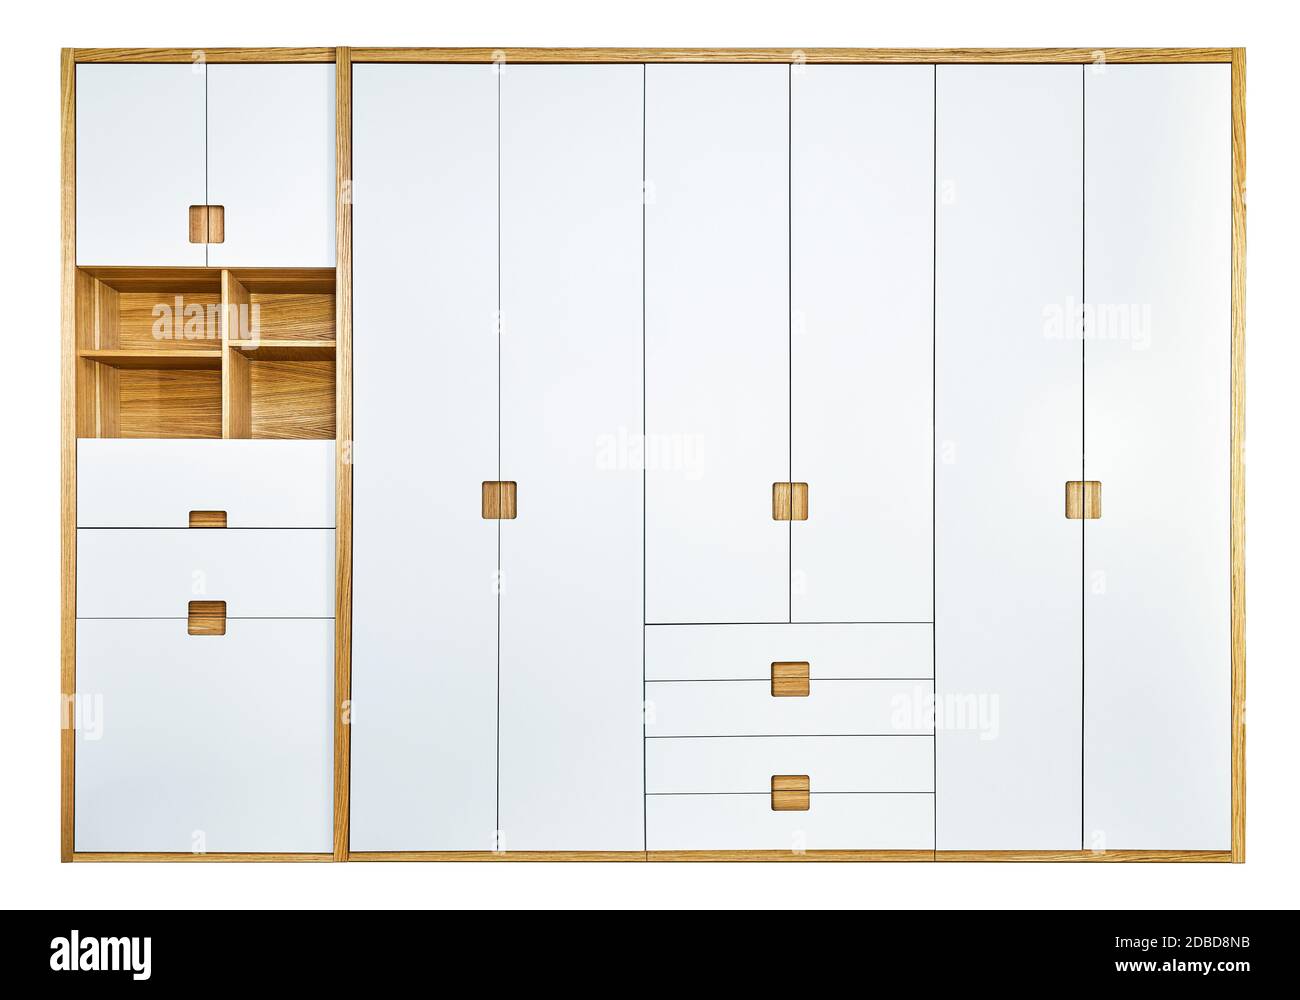 Modern wooden wardrobe with flat finger pull wardrobe doors isolated on white background. Oak veneered plywood cabinets with light gray painted cabine Stock Photo